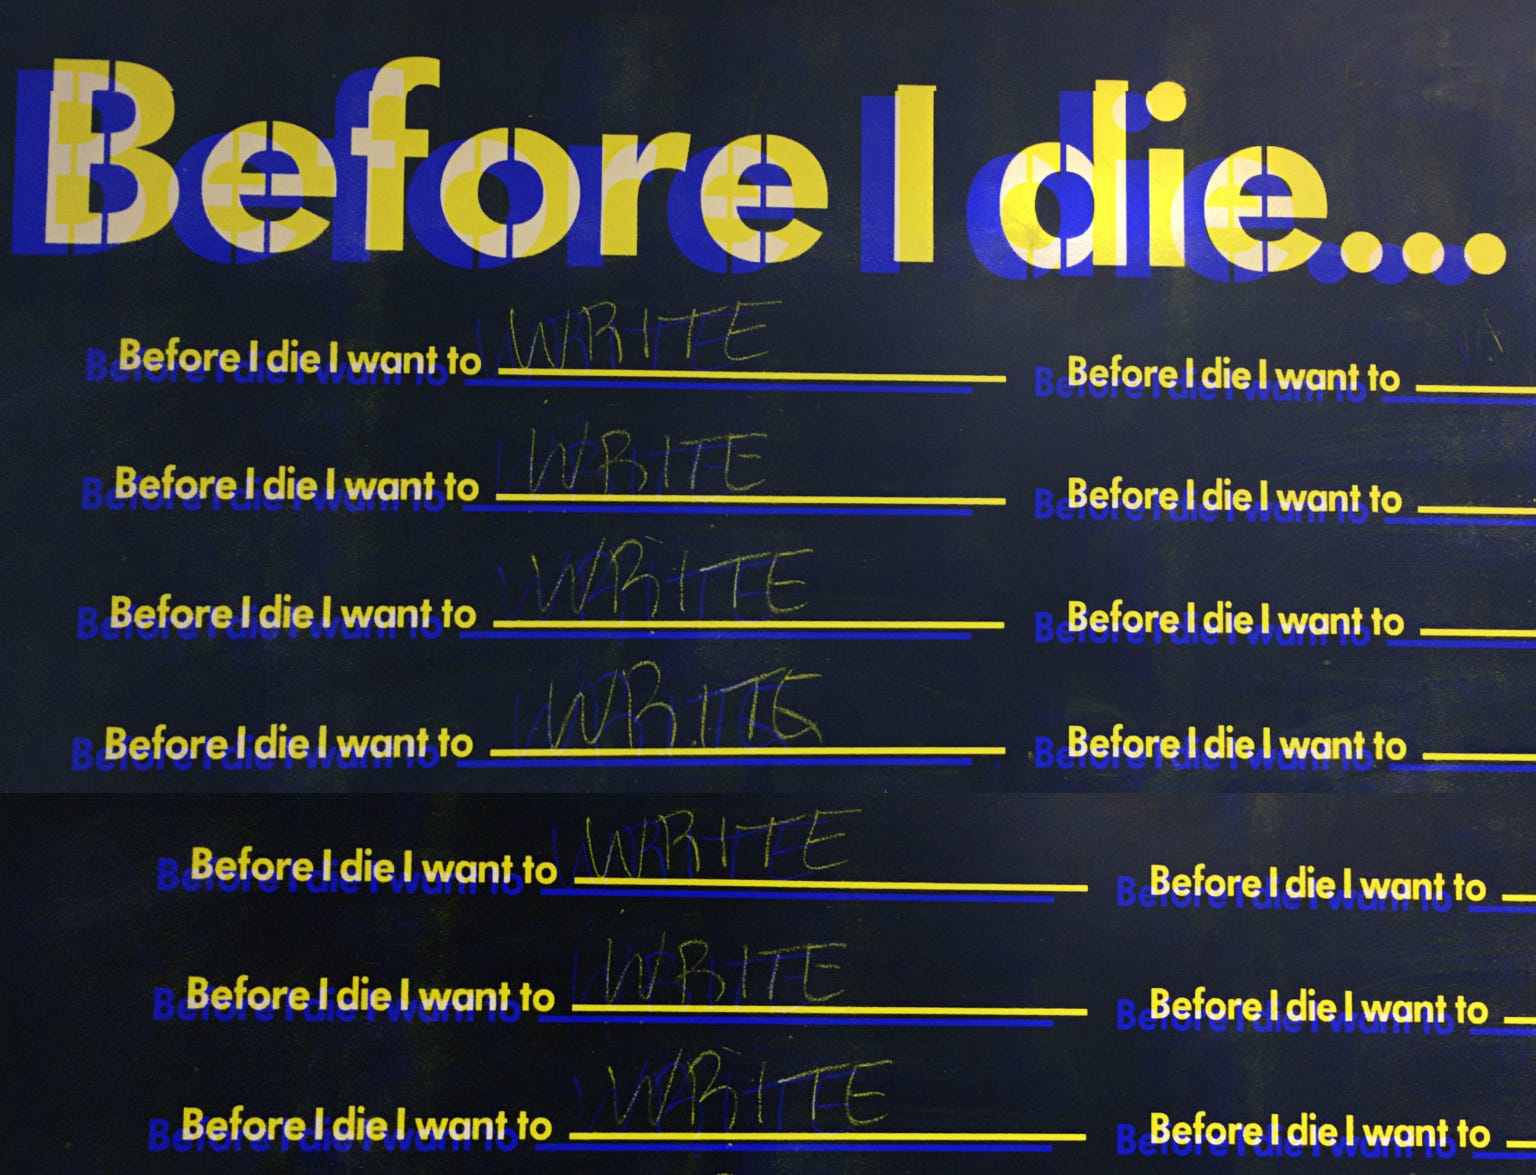 A chalkboard with a fill in the blank prompt: "Before I die I want to" with WRITE filled in for every answer.